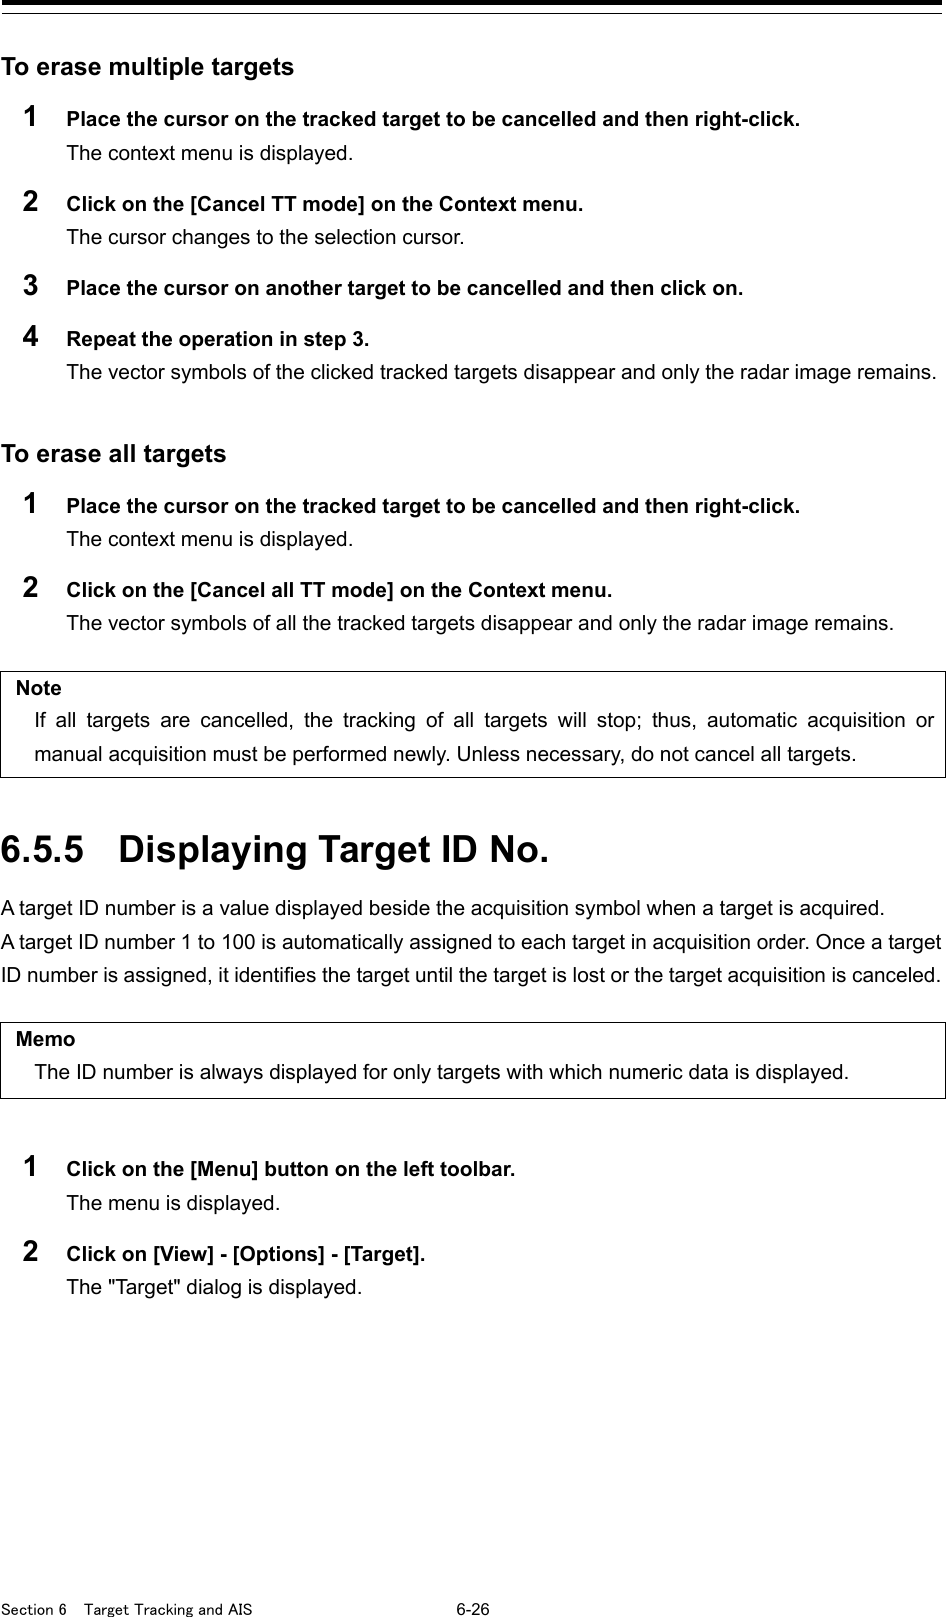  Section 6  Target Tracking and AIS 6-26  To erase multiple targets 1  Place the cursor on the tracked target to be cancelled and then right-click. The context menu is displayed. 2  Click on the [Cancel TT mode] on the Context menu. The cursor changes to the selection cursor. 3  Place the cursor on another target to be cancelled and then click on. 4  Repeat the operation in step 3. The vector symbols of the clicked tracked targets disappear and only the radar image remains.   To erase all targets   1  Place the cursor on the tracked target to be cancelled and then right-click. The context menu is displayed. 2  Click on the [Cancel all TT mode] on the Context menu.   The vector symbols of all the tracked targets disappear and only the radar image remains.    Note If all targets are cancelled, the tracking of all targets will stop; thus, automatic acquisition or manual acquisition must be performed newly. Unless necessary, do not cancel all targets.   6.5.5 Displaying Target ID No.   A target ID number is a value displayed beside the acquisition symbol when a target is acquired. A target ID number 1 to 100 is automatically assigned to each target in acquisition order. Once a target ID number is assigned, it identifies the target until the target is lost or the target acquisition is canceled.    Memo The ID number is always displayed for only targets with which numeric data is displayed.  1  Click on the [Menu] button on the left toolbar. The menu is displayed. 2  Click on [View] - [Options] - [Target]. The &quot;Target&quot; dialog is displayed.    